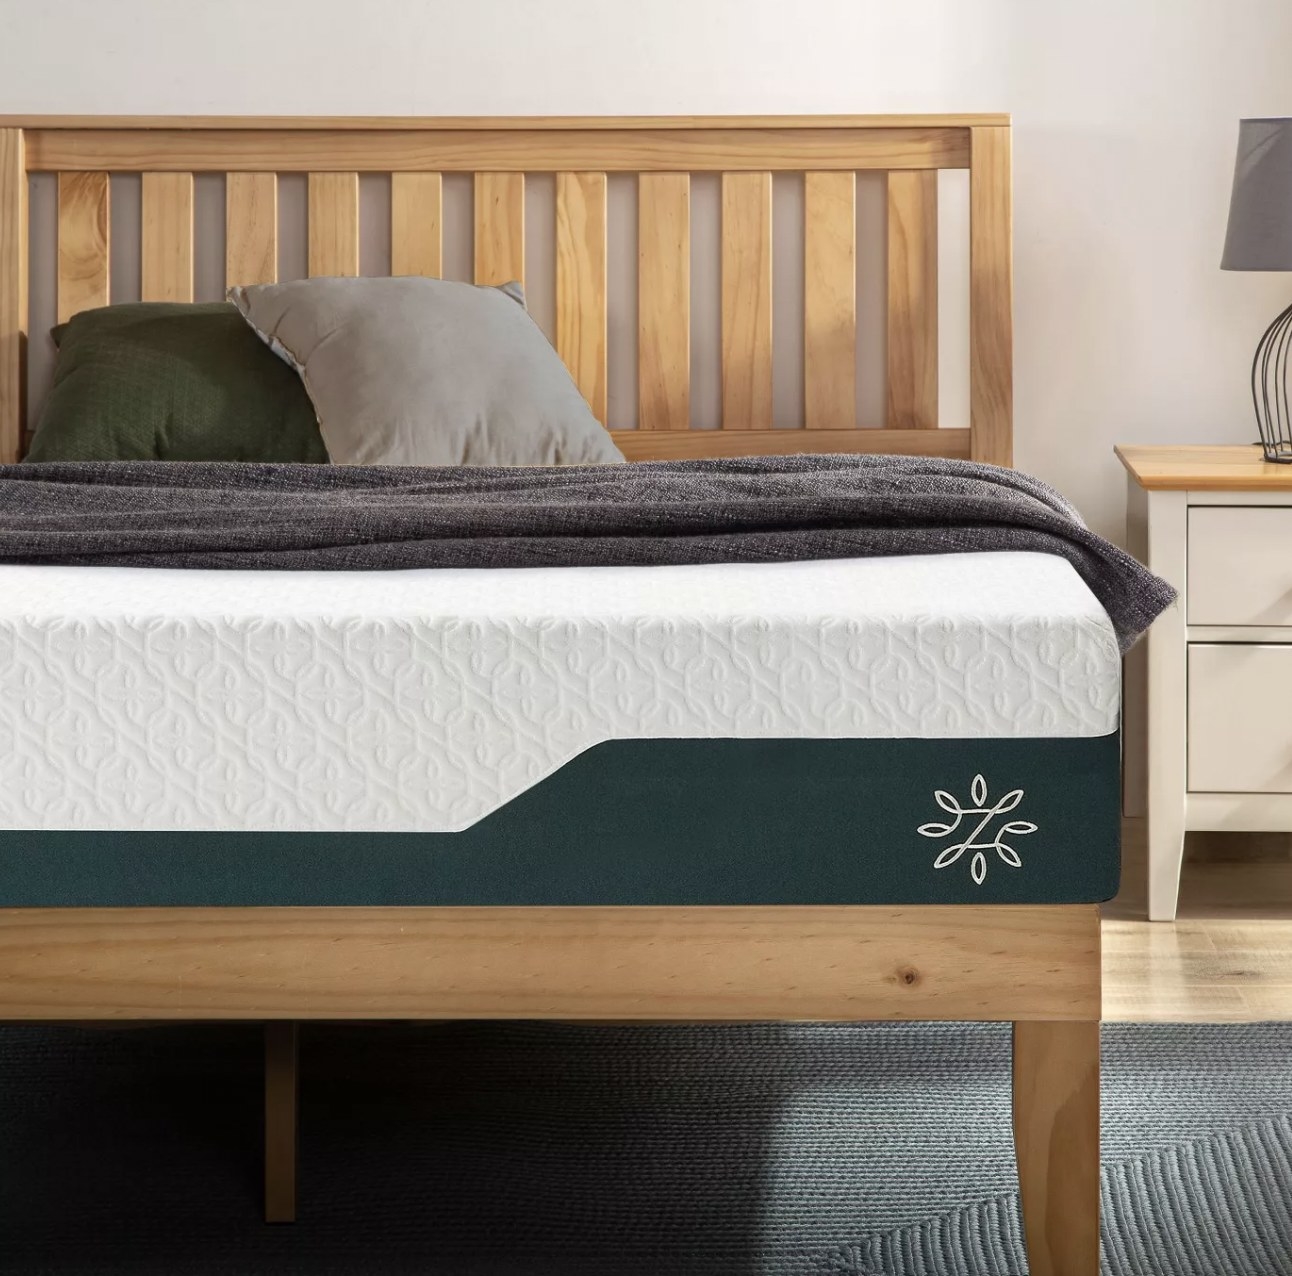 the mattress on a bed frame in a room